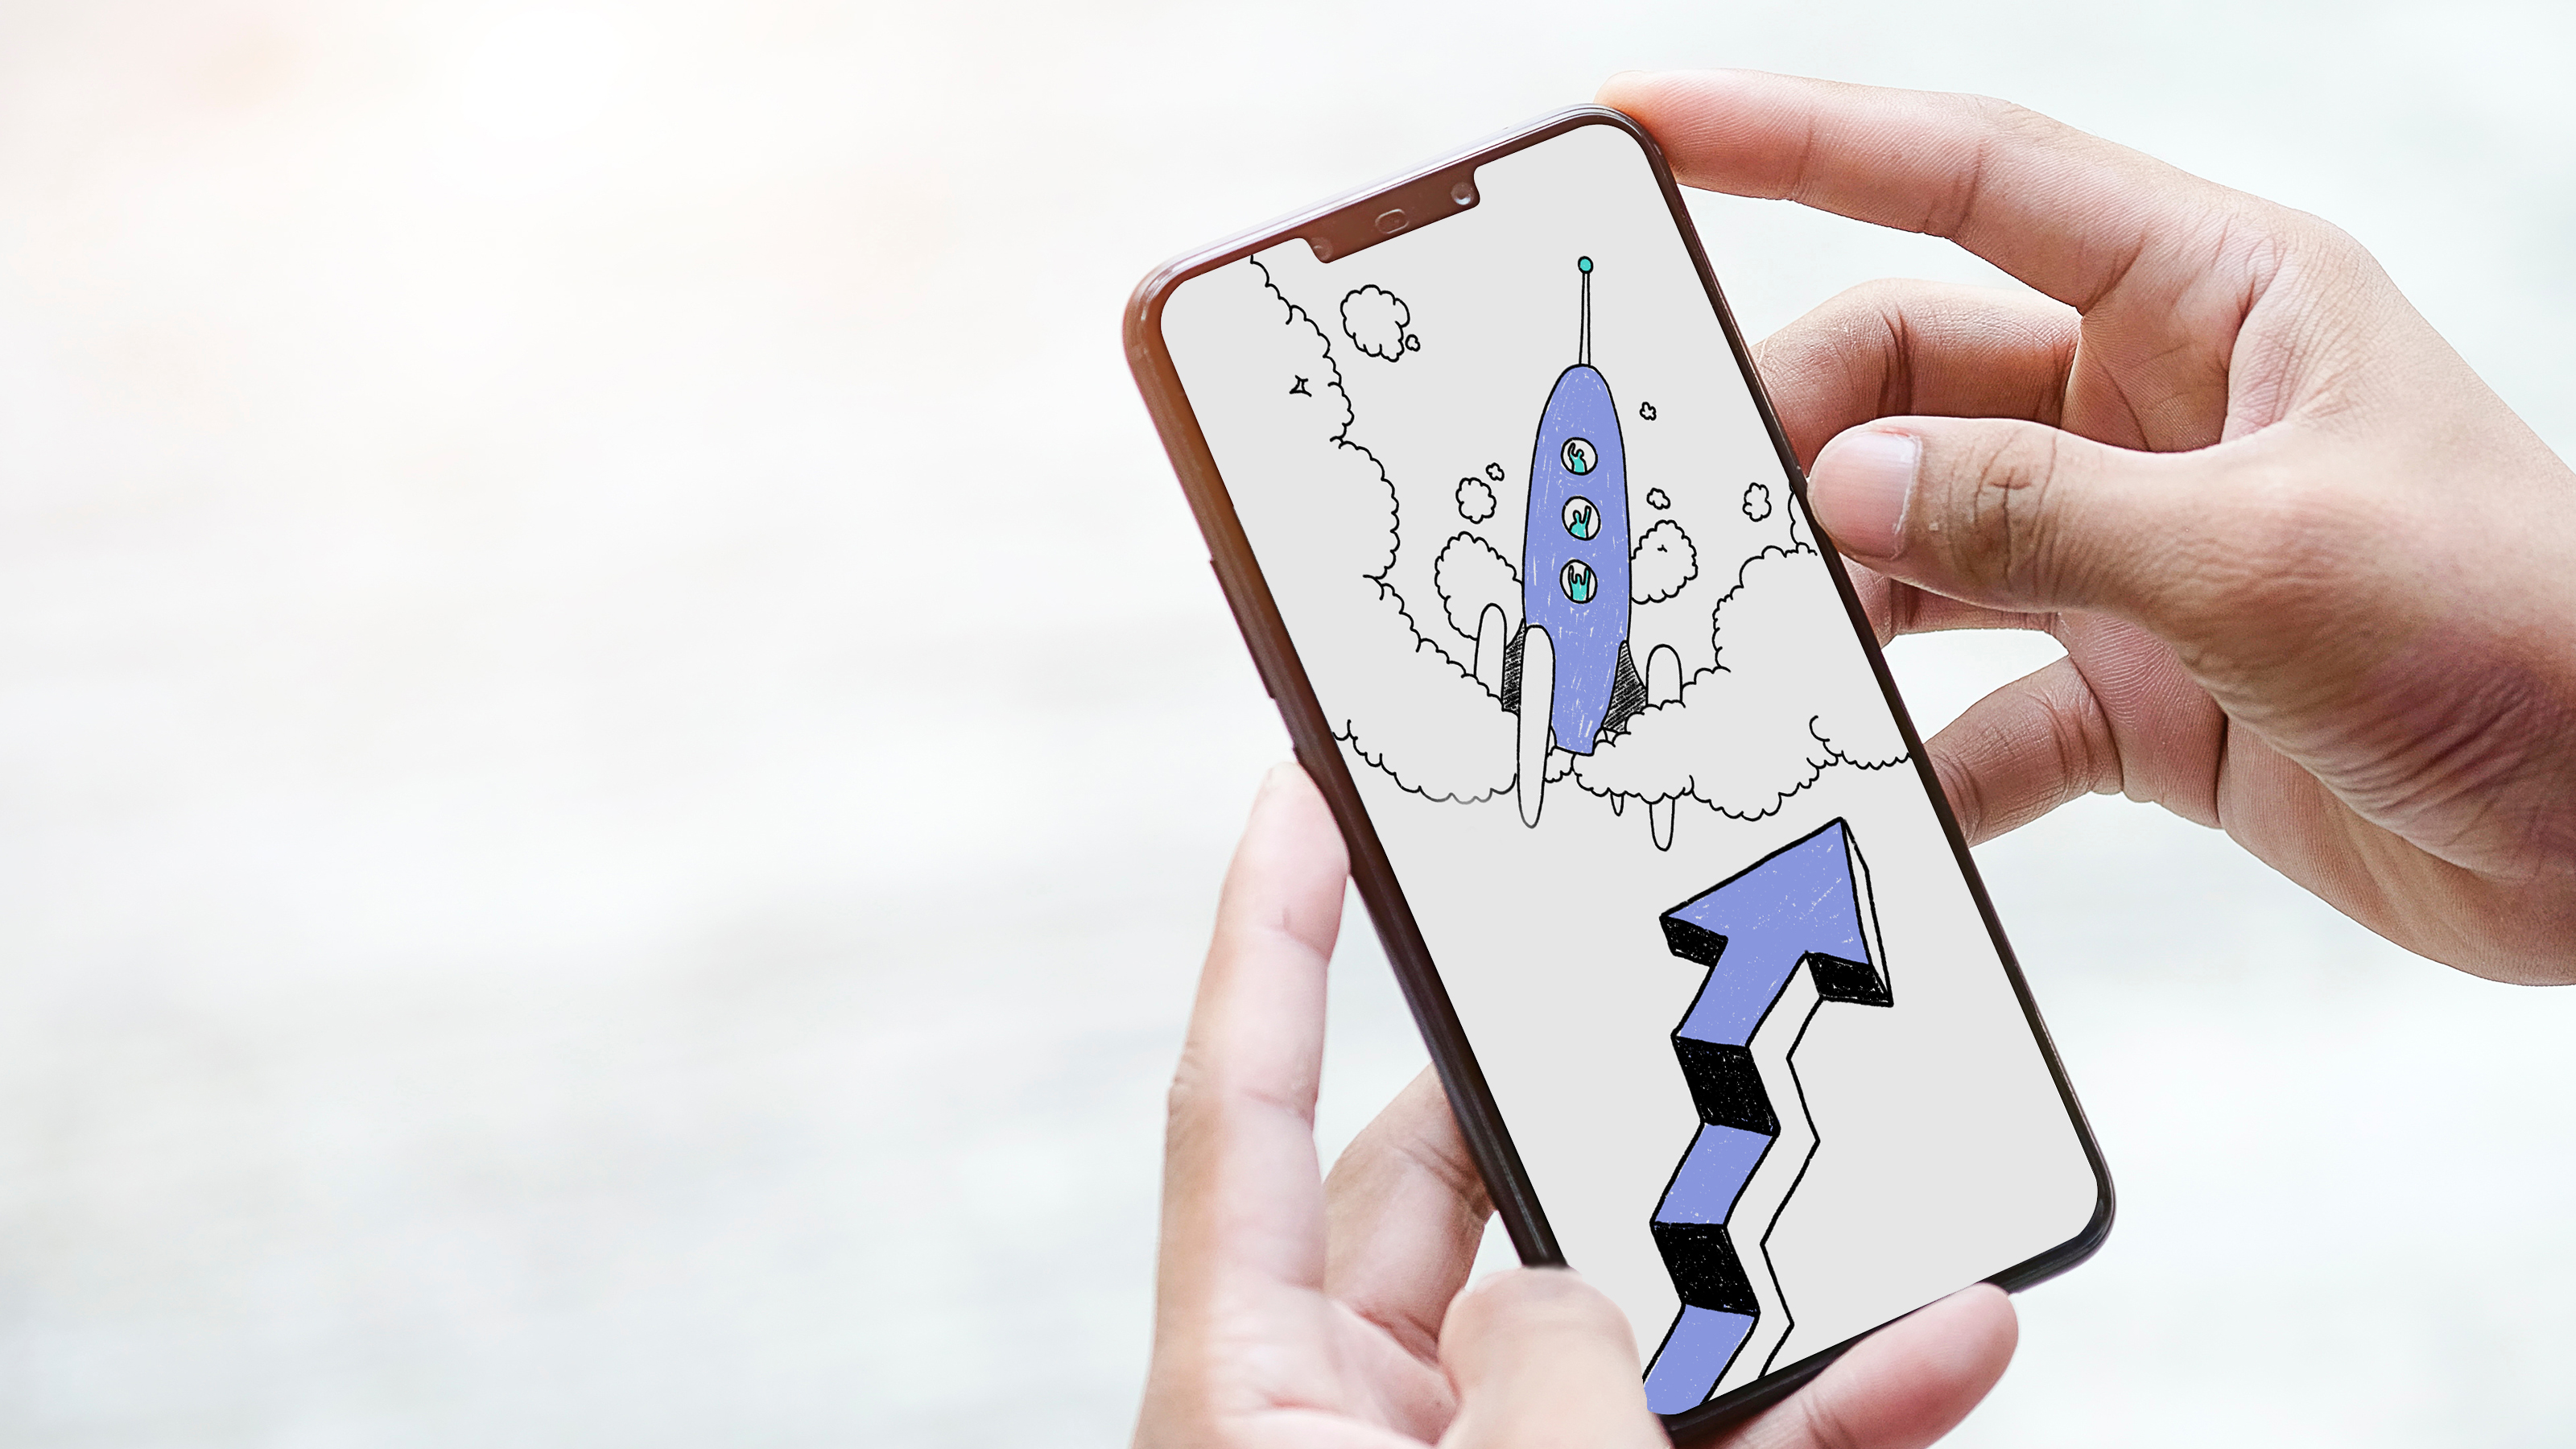 Mobile phone showing a rocket and an arrow representing programmatic ad trends